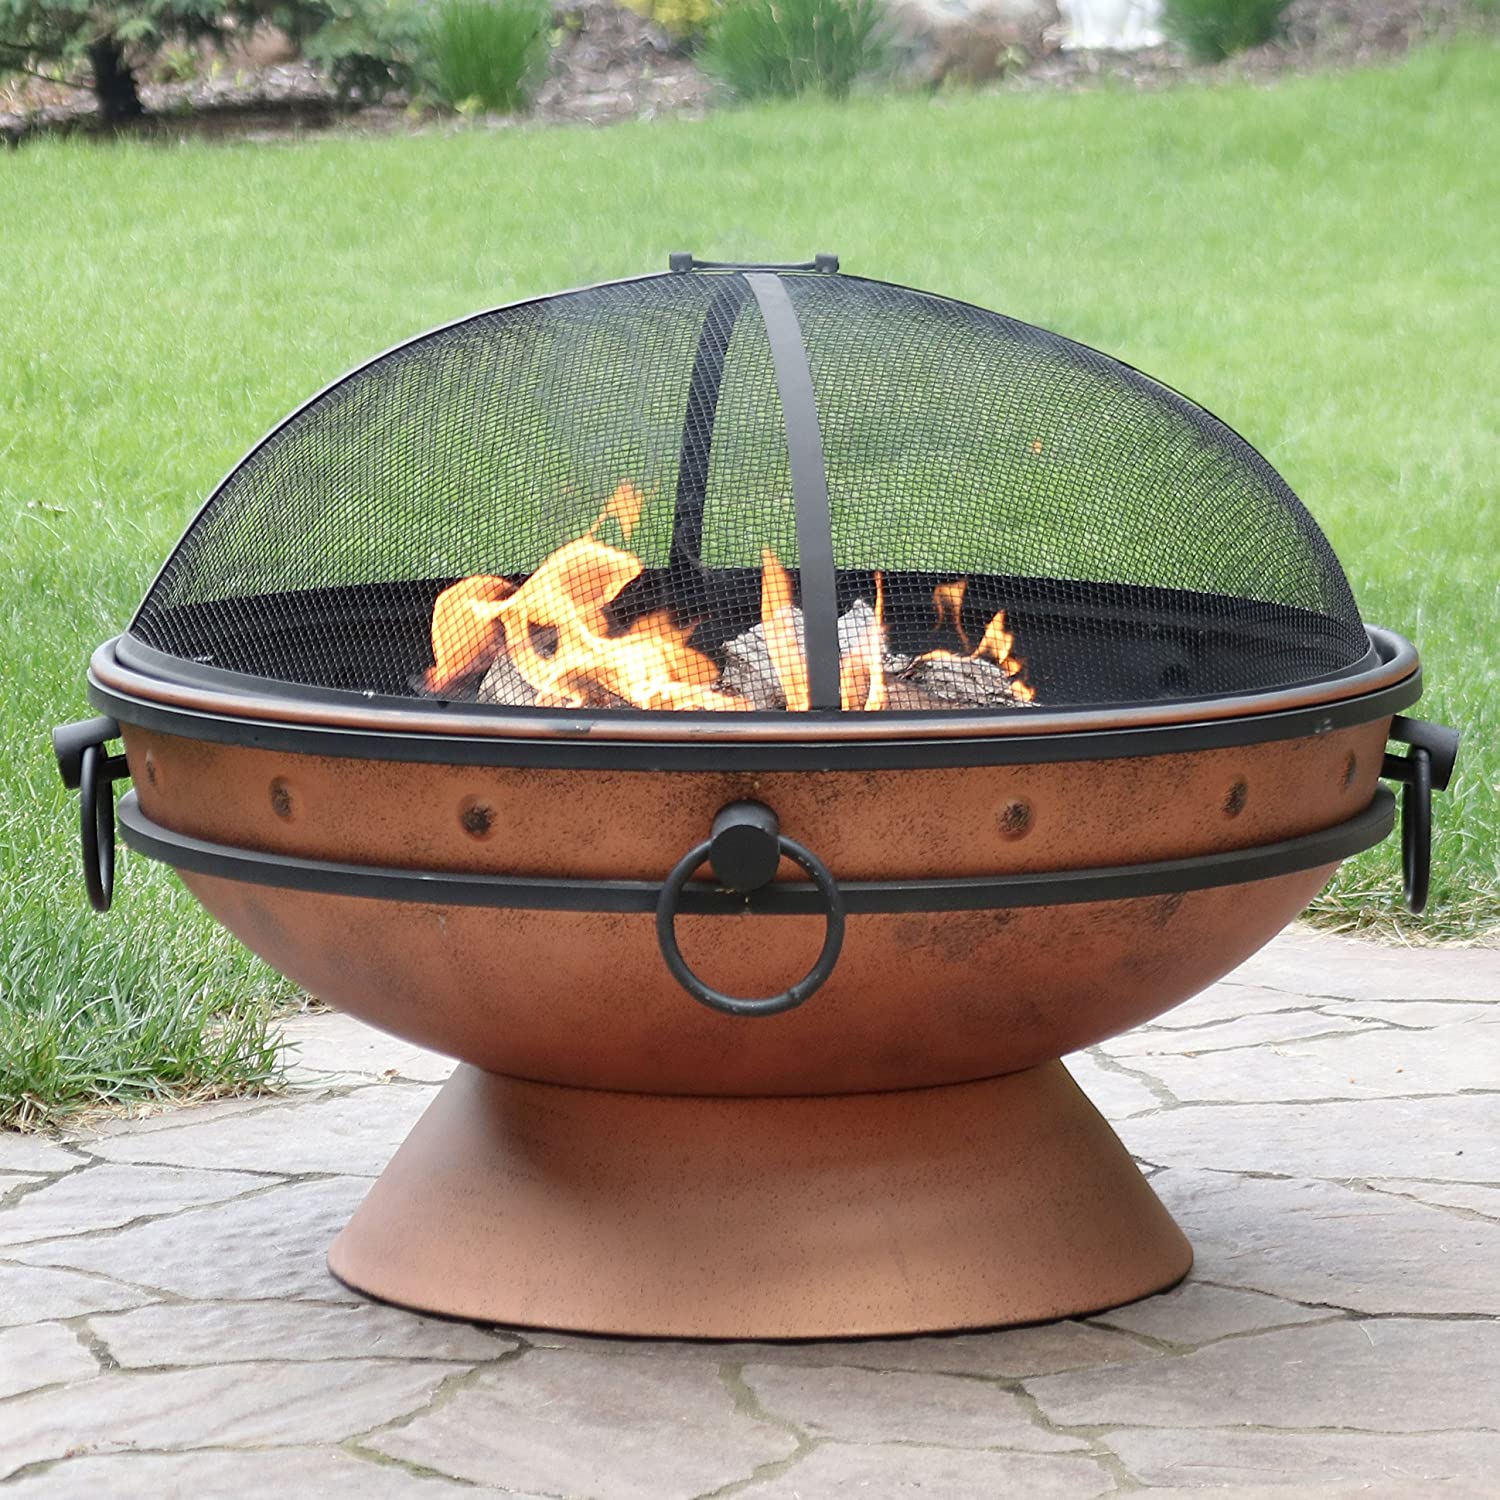 Fire Pits In Stock Now To Extend Your, Landmann Usa Patio Lights Fire Pit